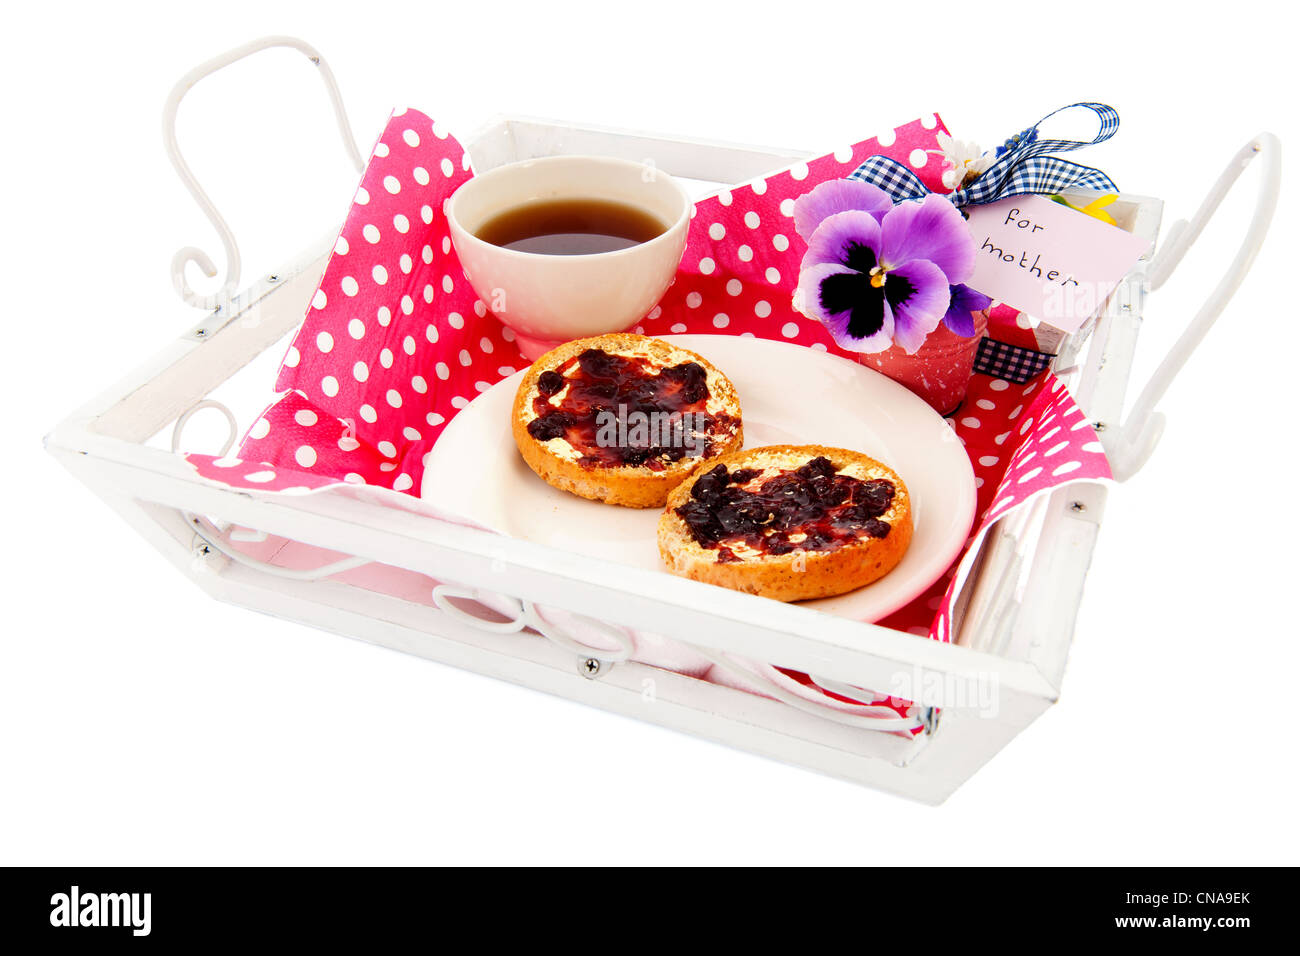 https://c8.alamy.com/comp/CNA9EK/tray-with-breakfast-for-mother-with-tea-and-biscuits-CNA9EK.jpg